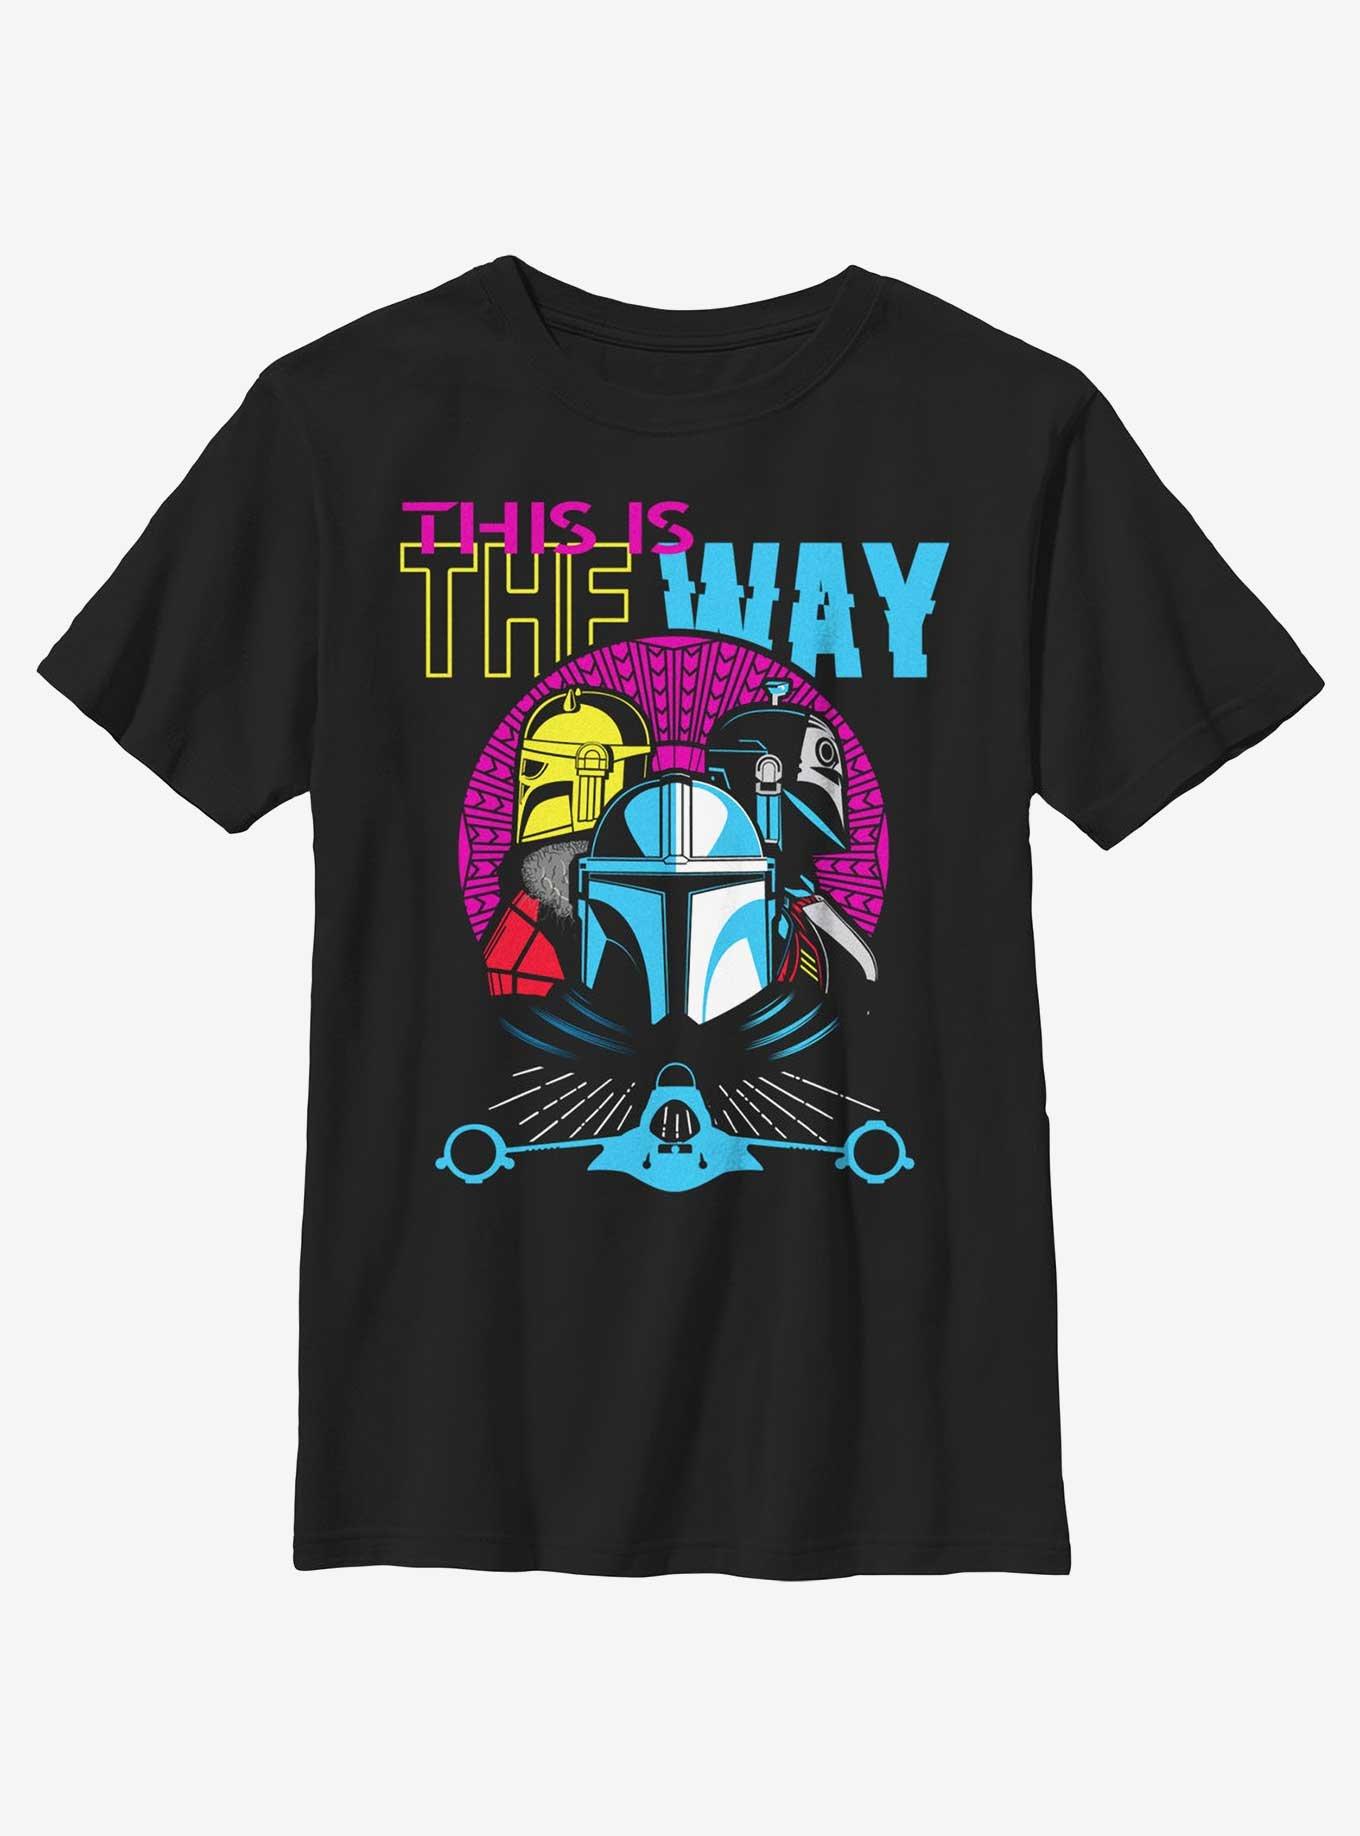 Star Wars The Mandalorian Hyper Sunset This Is The Way Youth T-Shirt, BLACK, hi-res